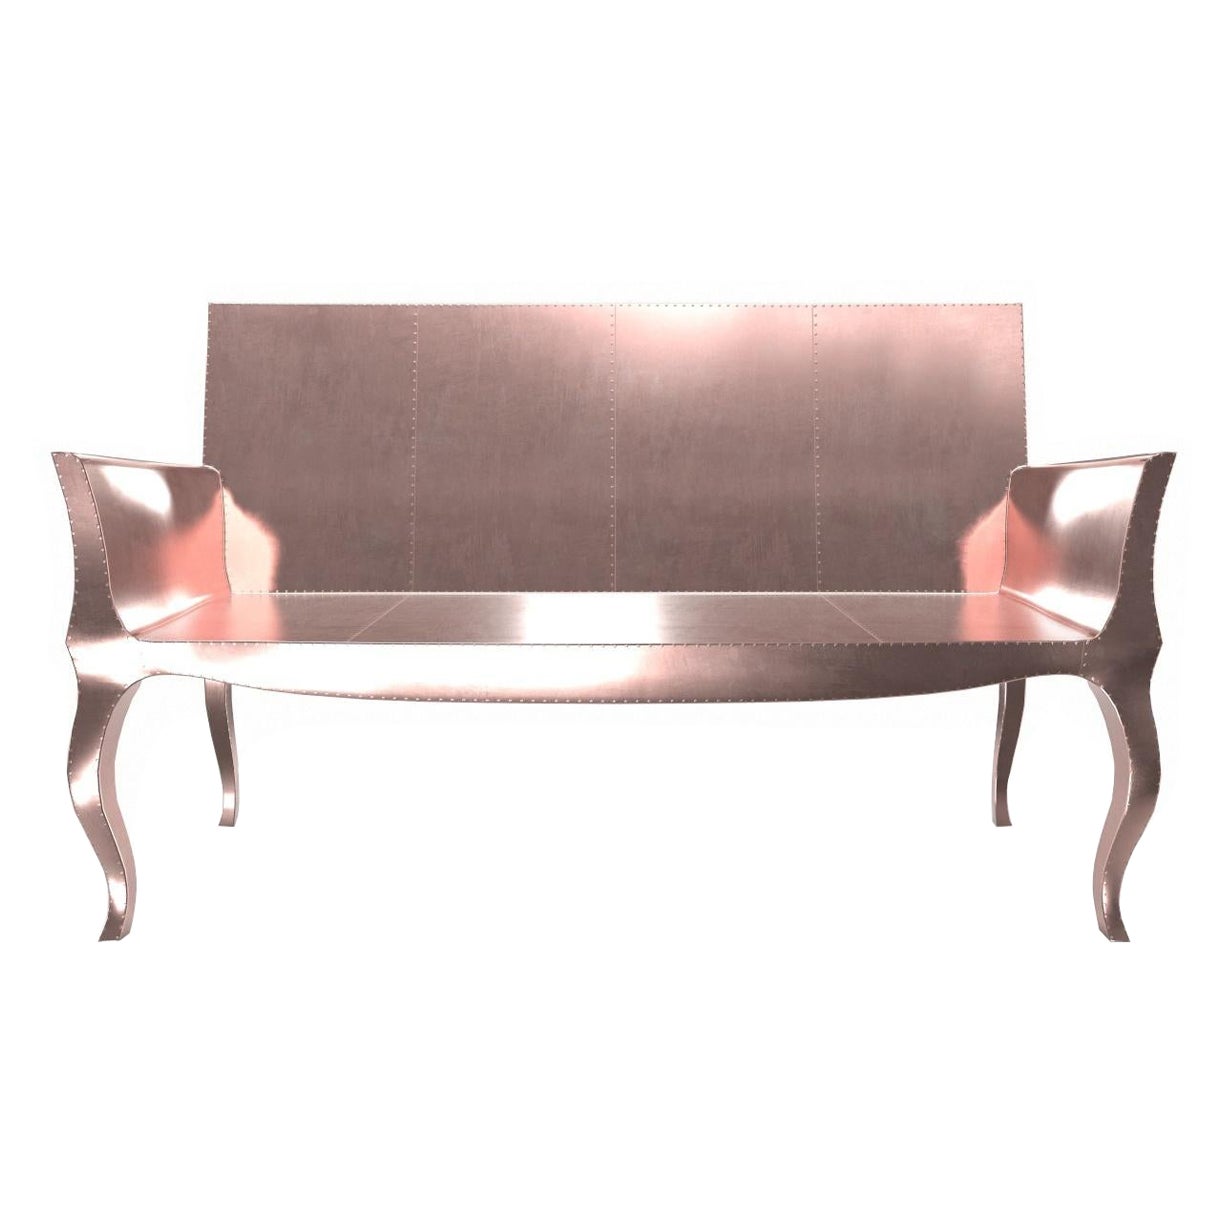 Louise Settee Art Deco Canapes in Smooth Copper by Paul Mathieu for S Odegard For Sale